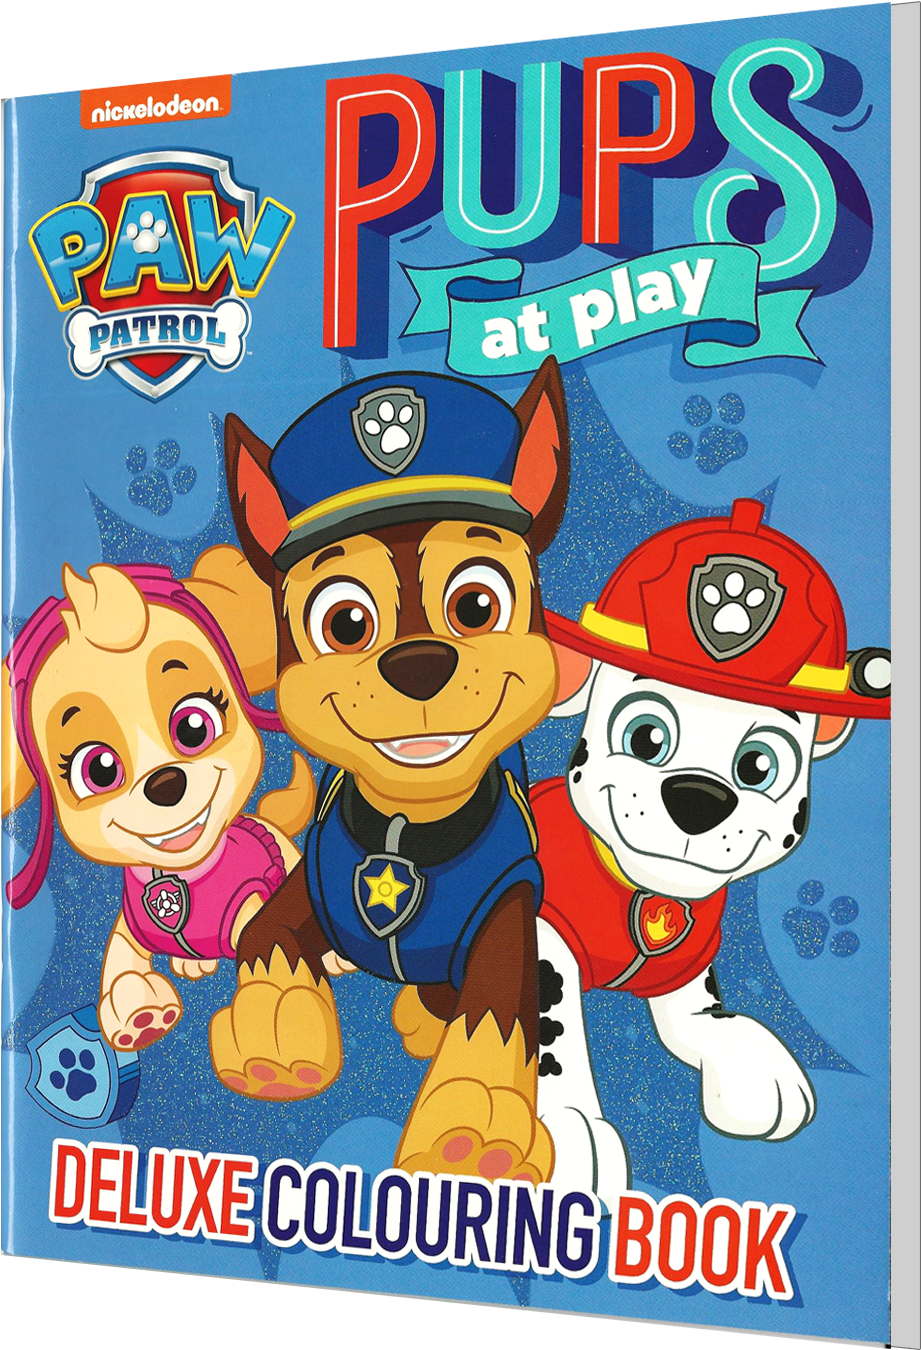 A Cartoon Of Dogs On A Dvd Cover